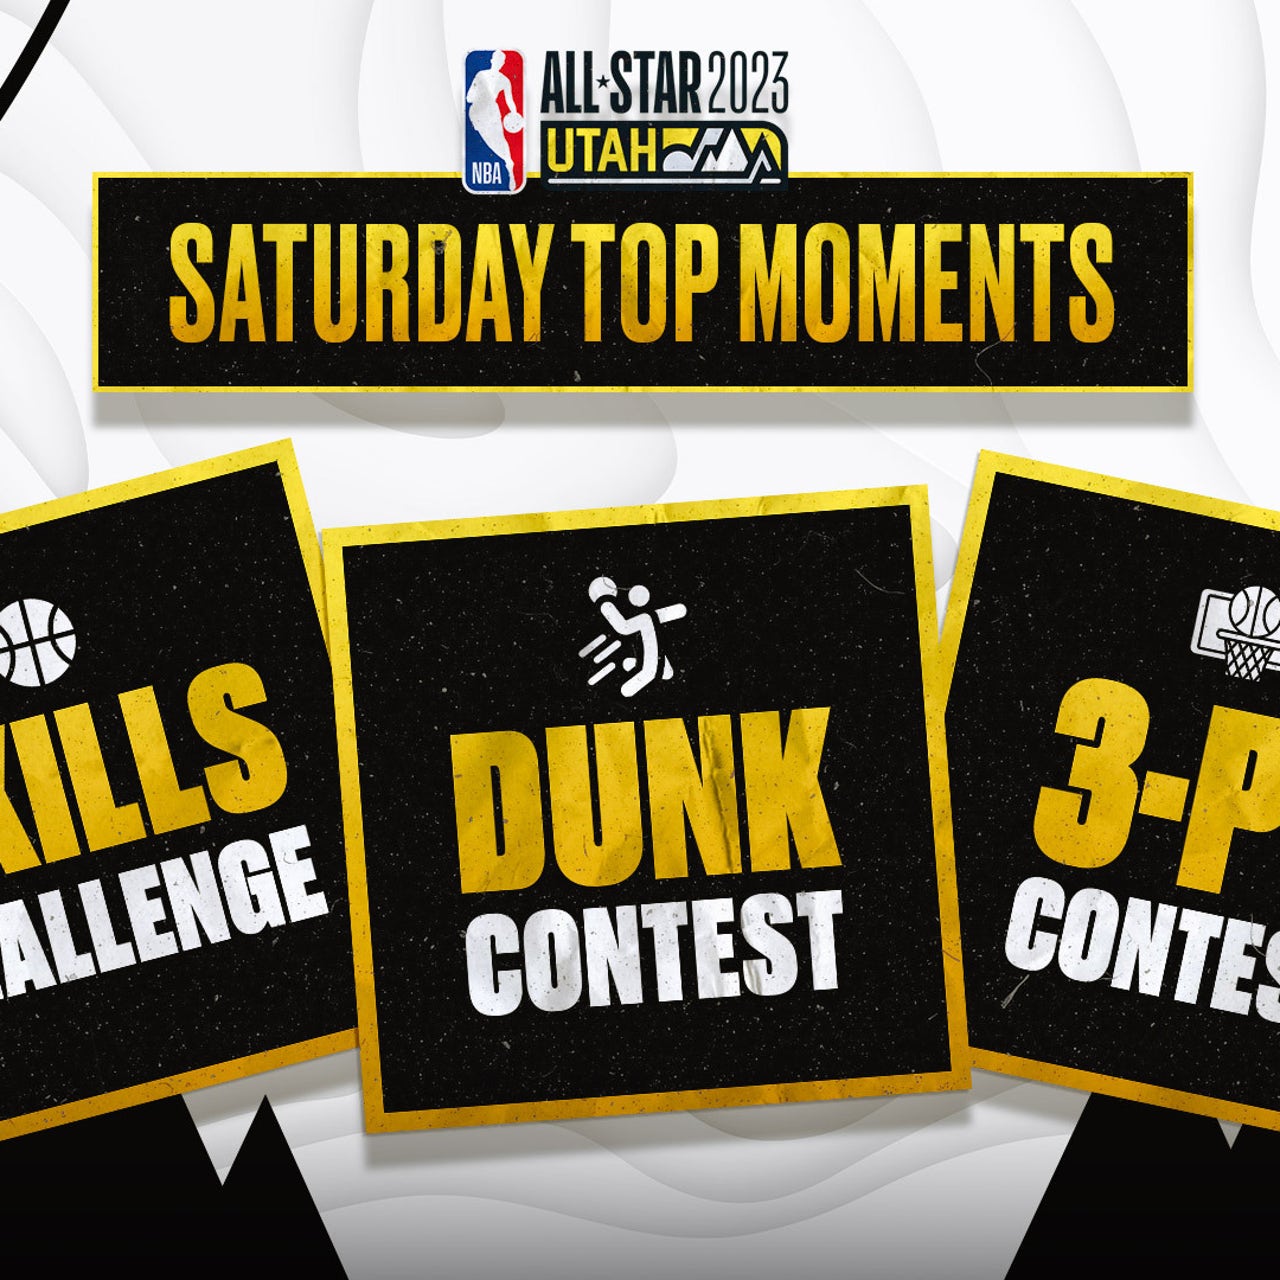 Who is in the NBA Slam Dunk contest? 2023 Slam Dunk contest odds